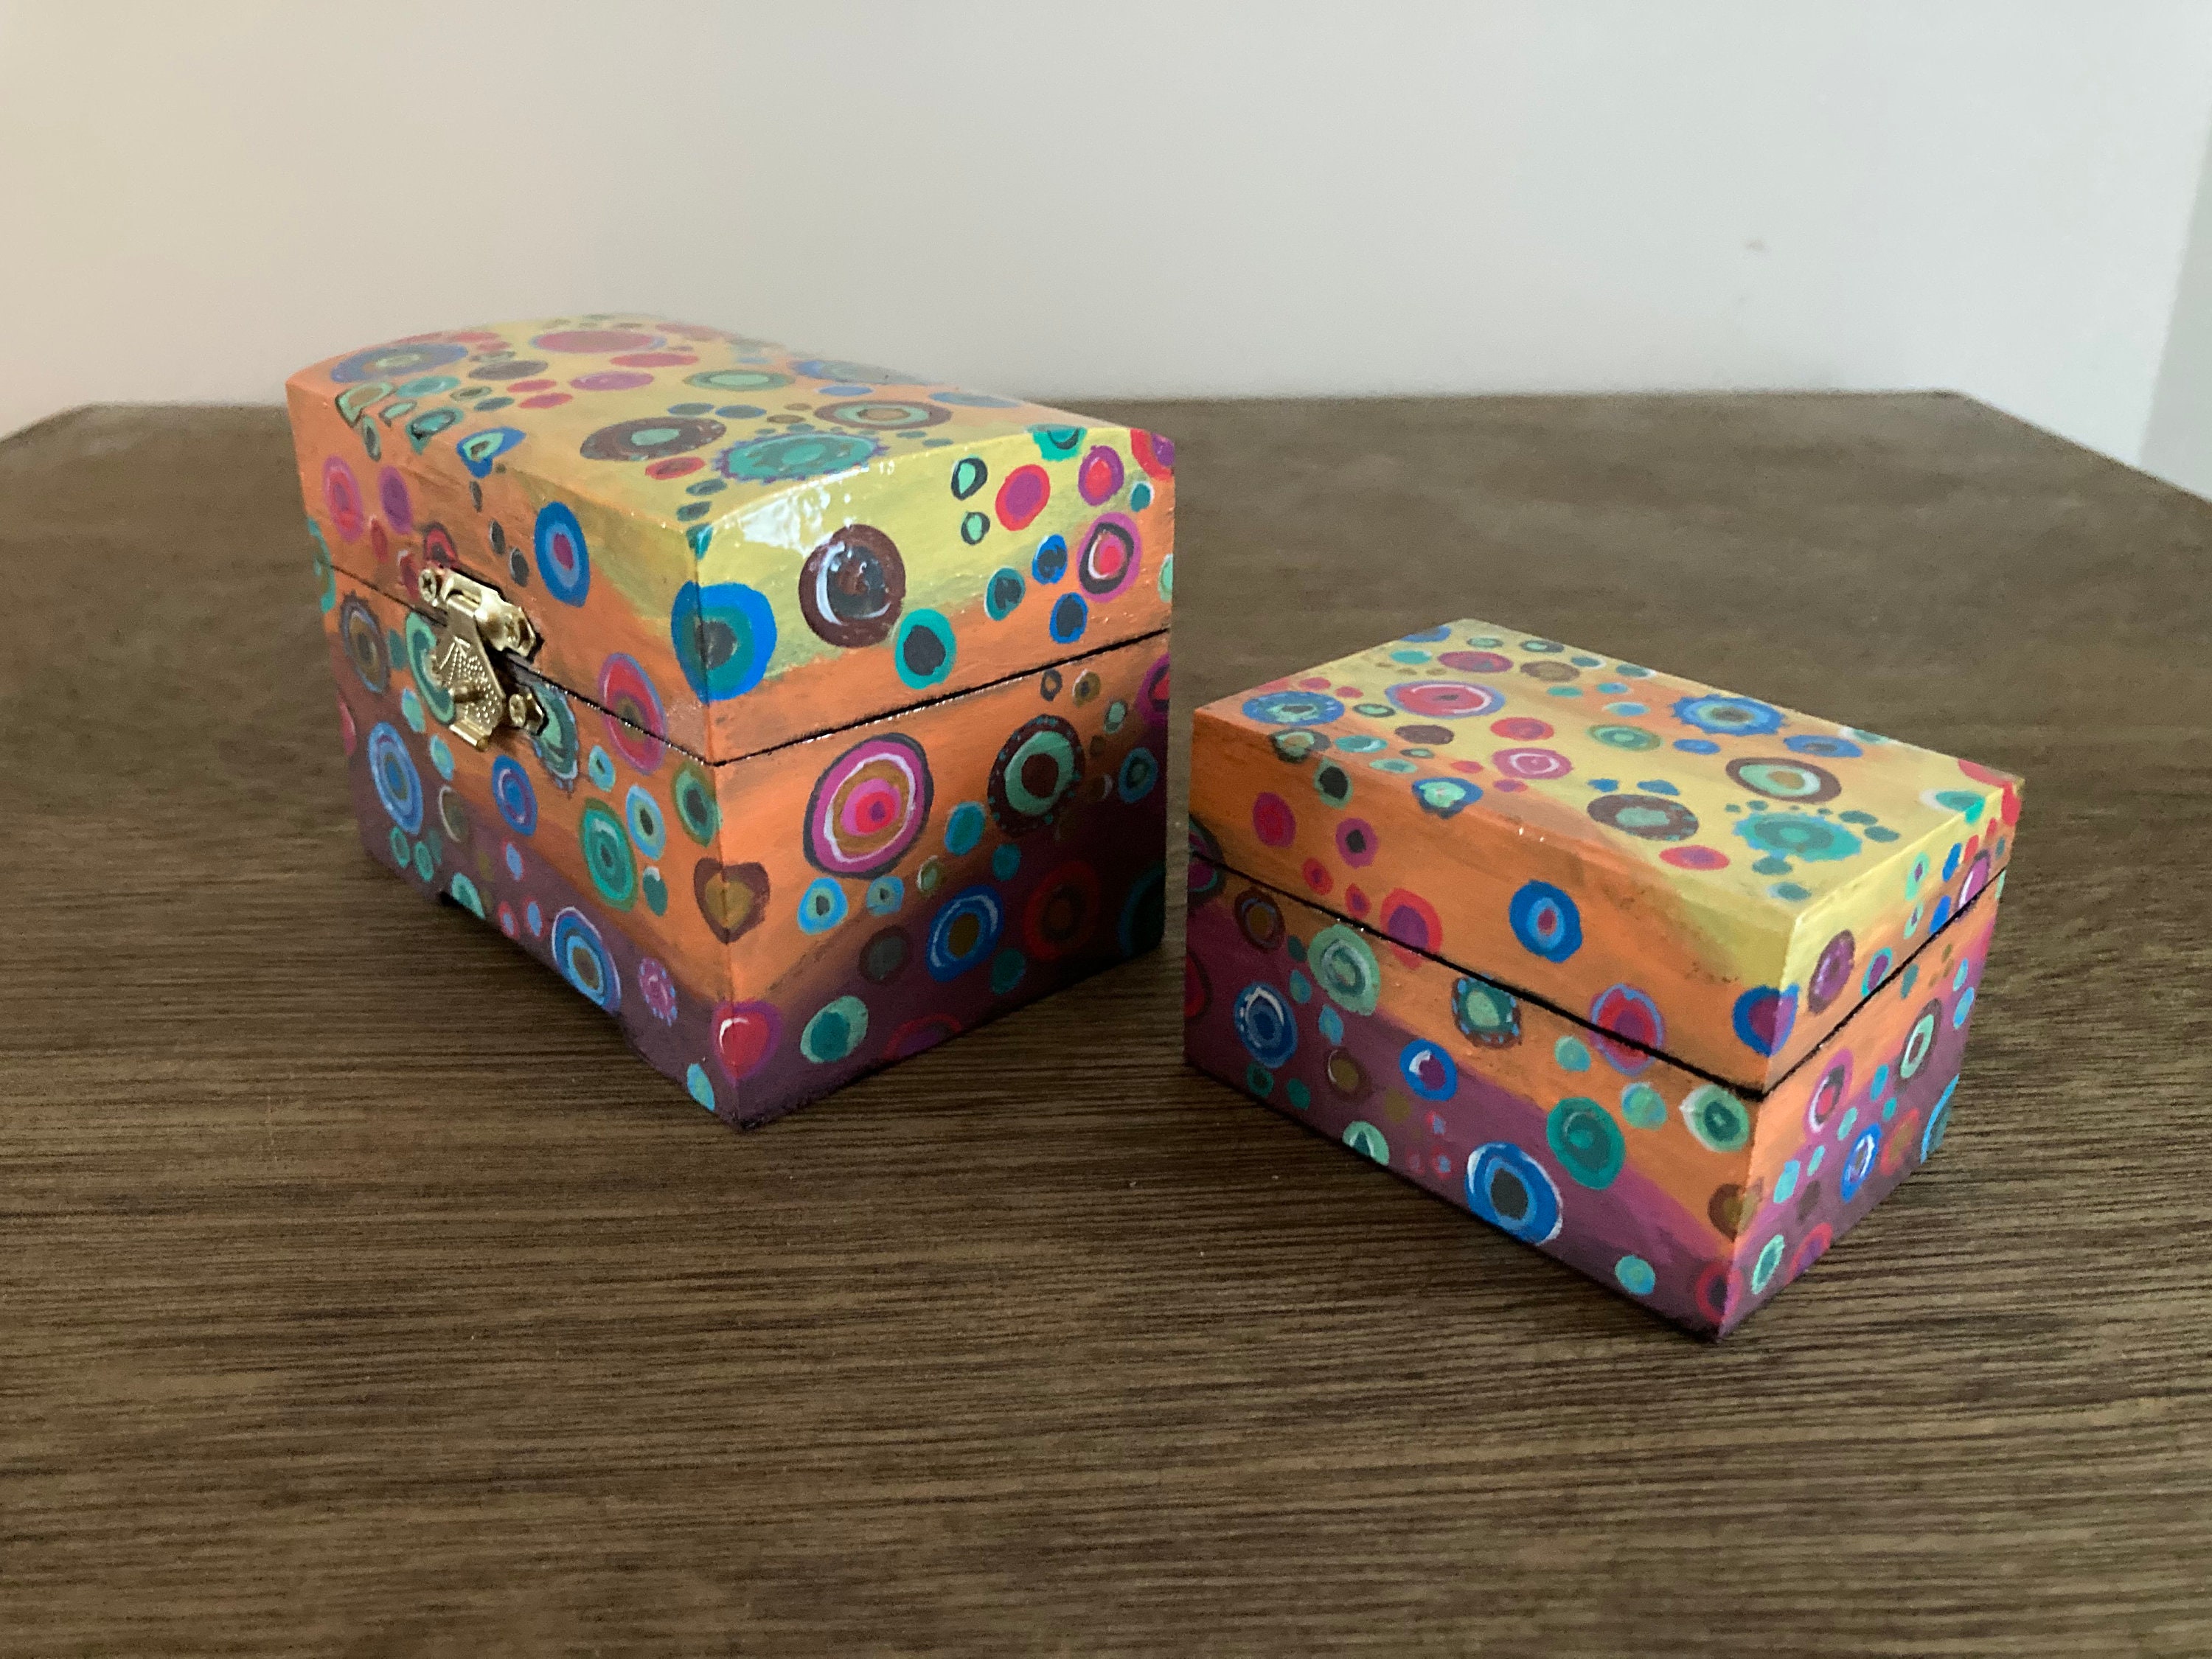 Abstract Design Handpainted Boxes. - Etsy UK